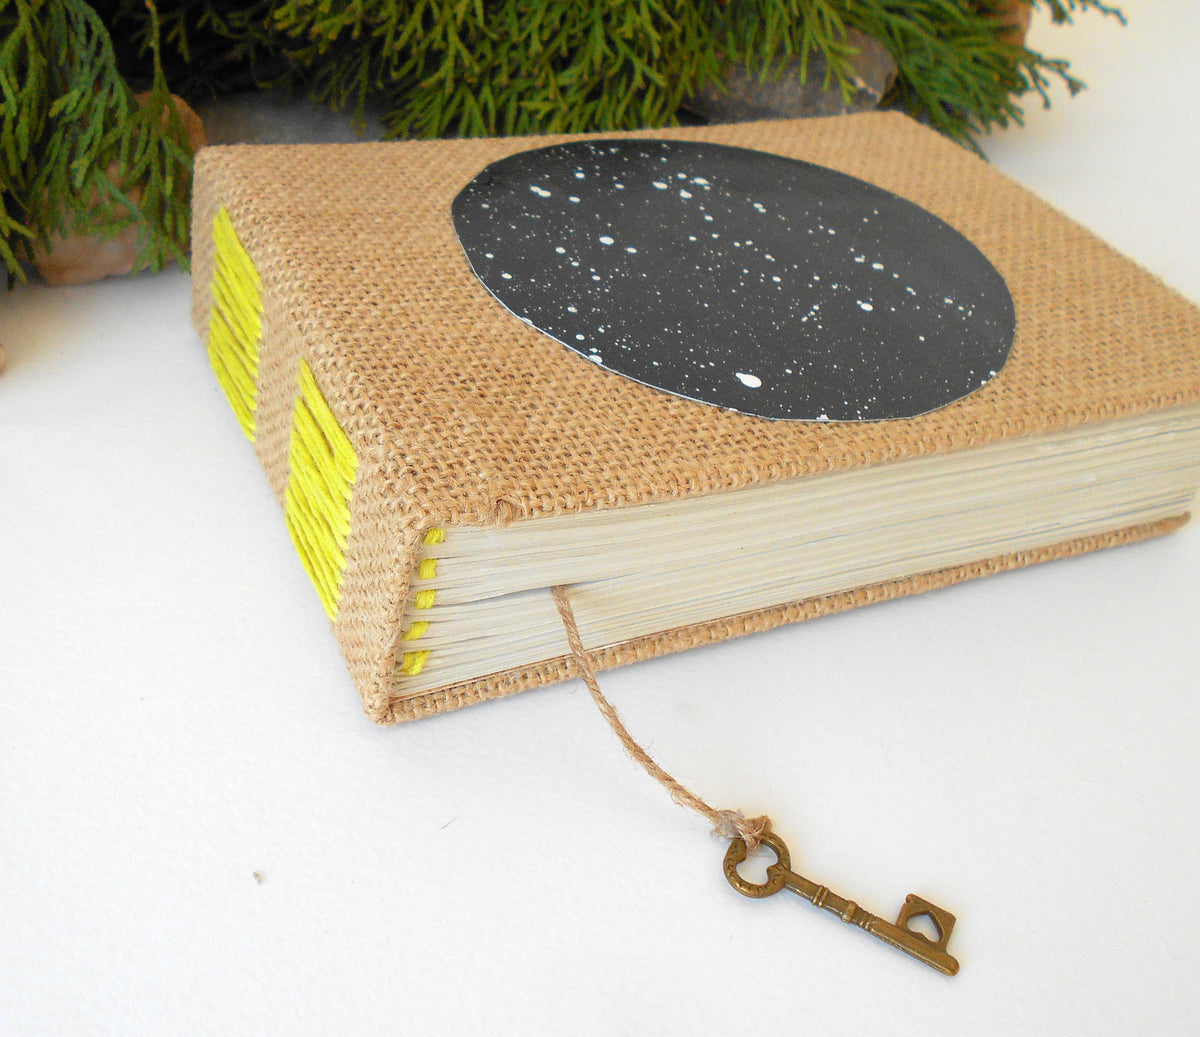 Travel sketchbook with hardcovers and 100% recycled pages and a star sky hand-painted acrylic art circle that I made. It can be used as a wedding book for a rustic wedding.